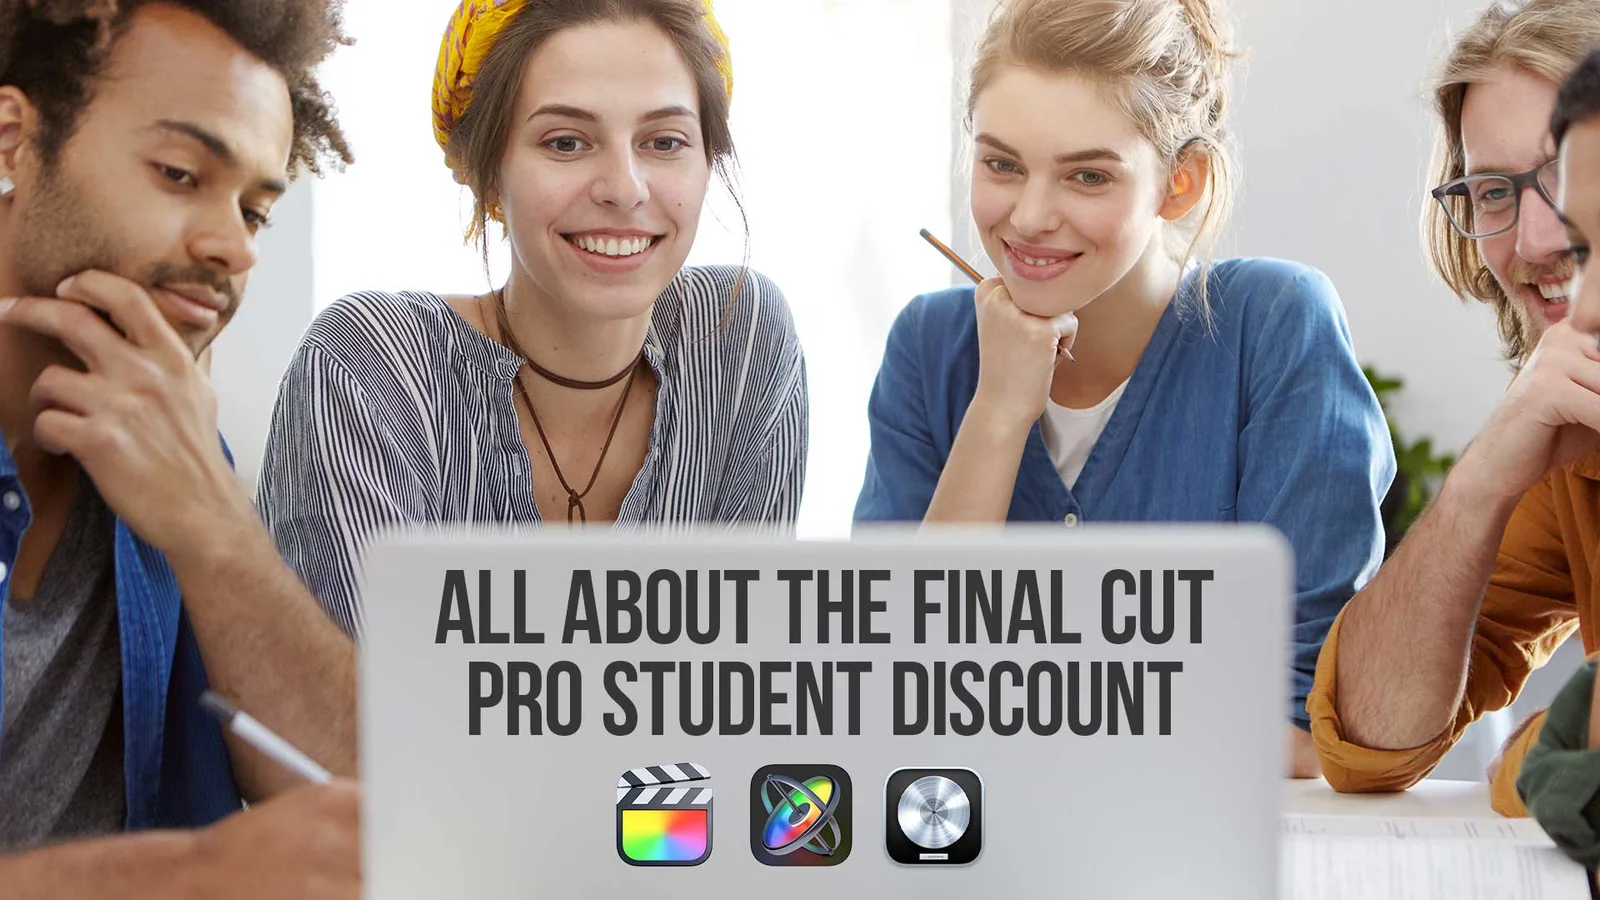 All About the Final Cut Pro Student Discount